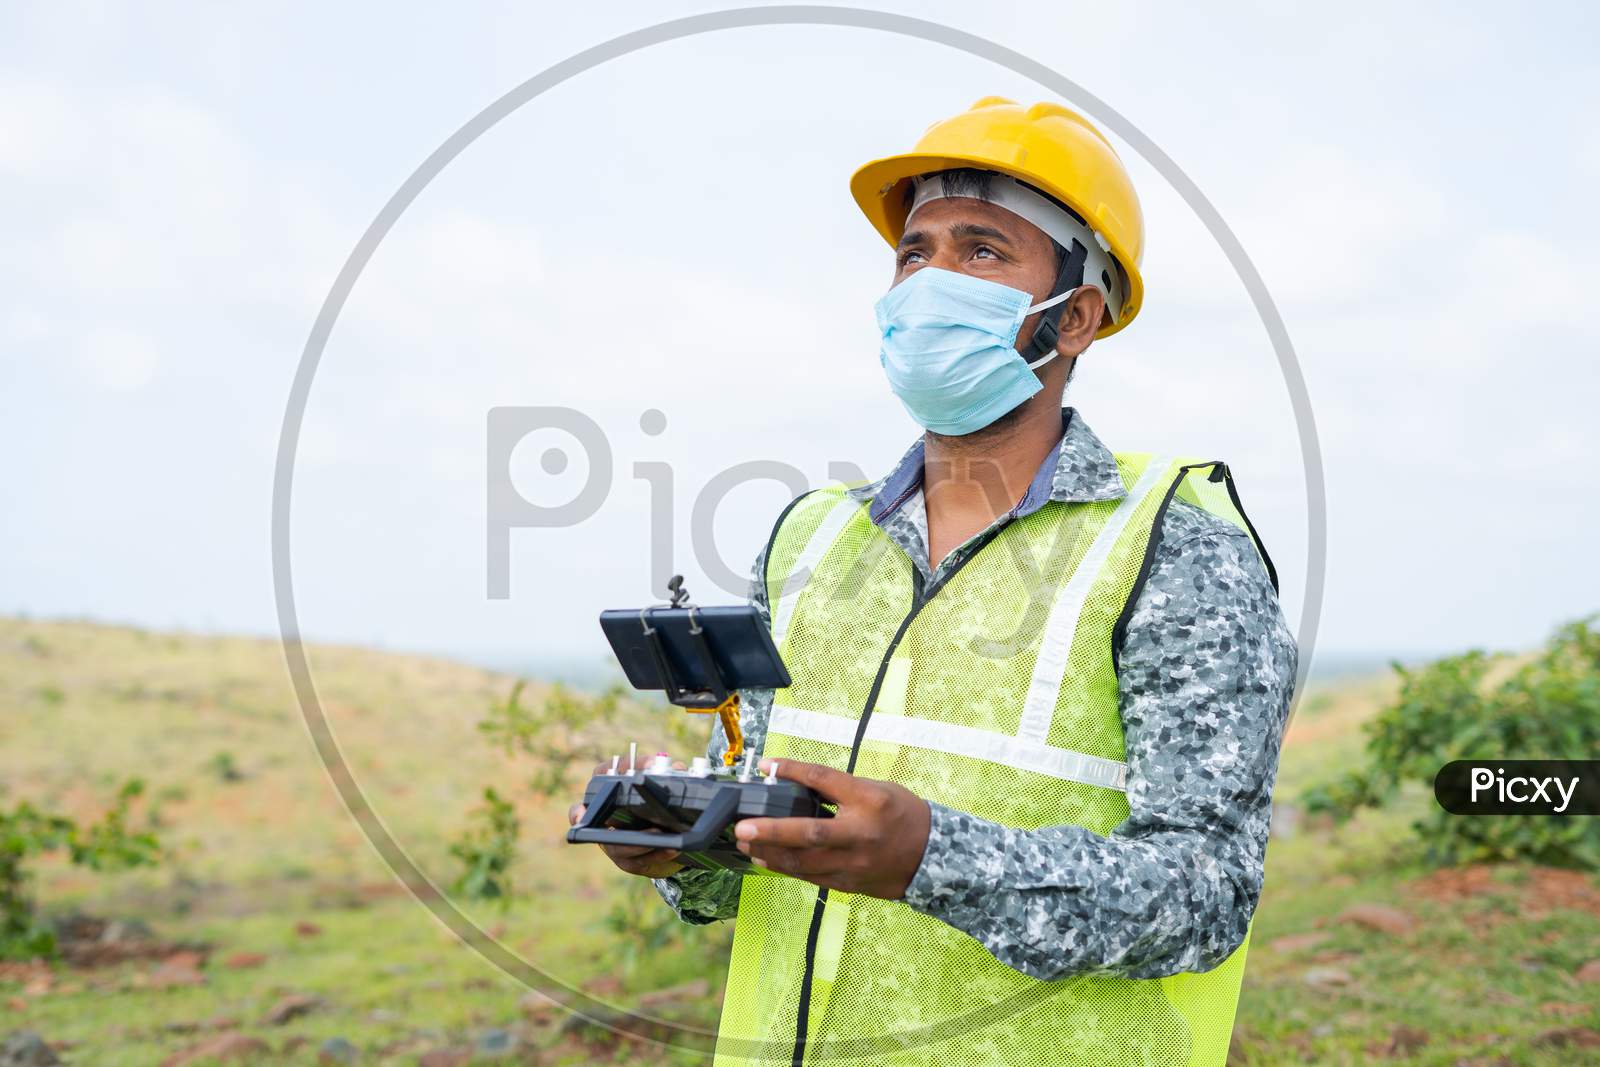 Drone Operator With Safety Helmet And Face Mask Operating Drone Using Remote Controller - Concept Of Engineer Doing Aerial Survey Using Uav During Coronavirus Covid-19 Pandemic